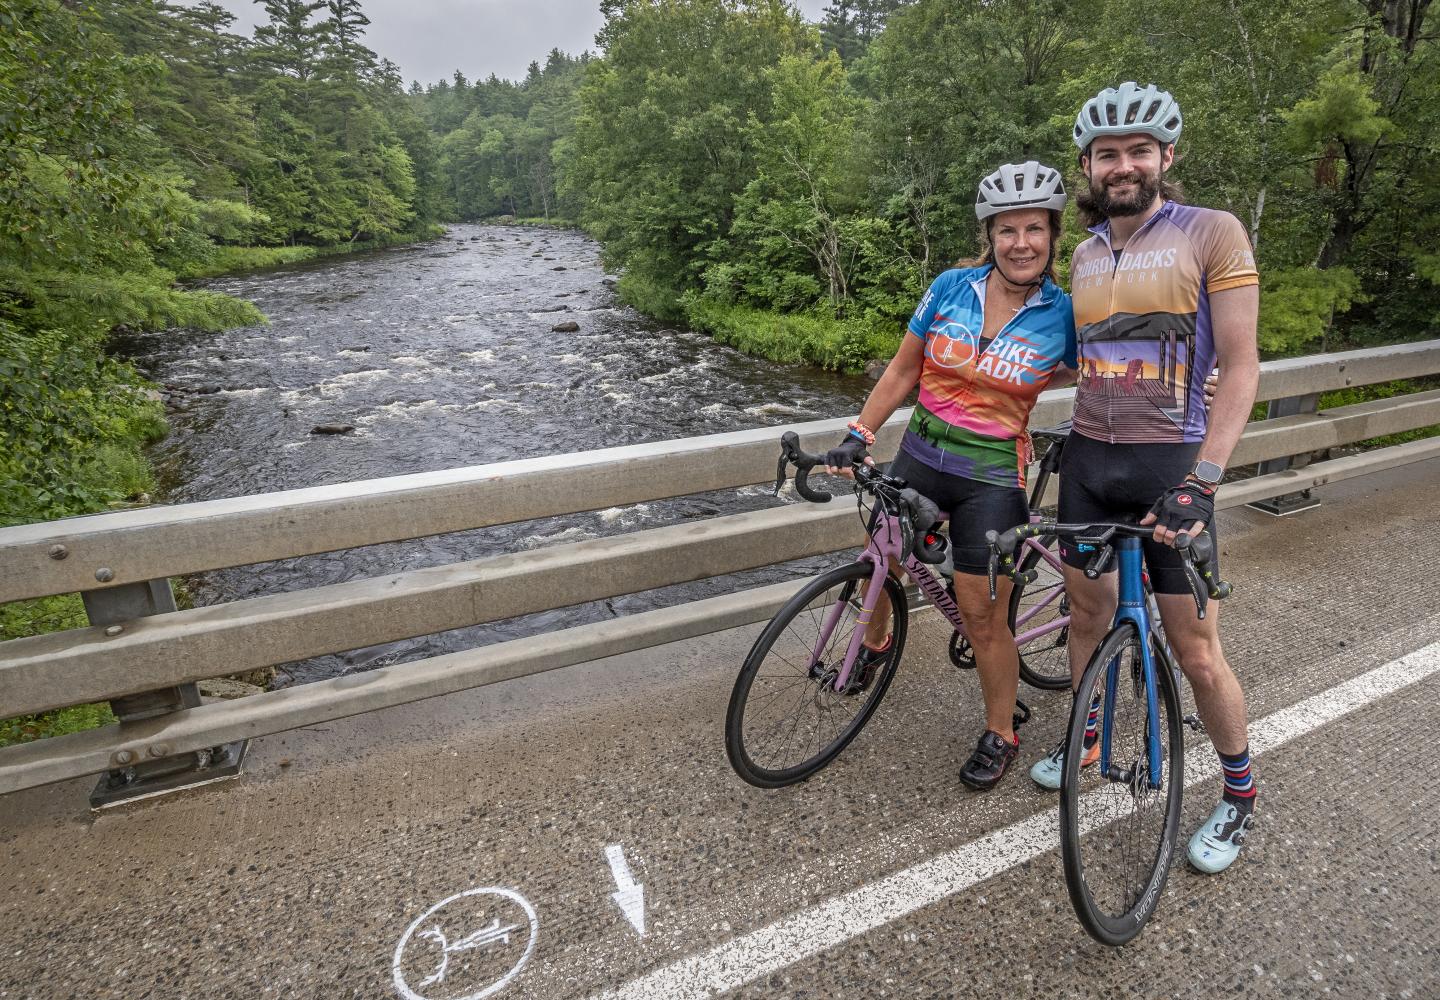 Ride for the River is an Adirondack classic featuring the stunning Ausable River Watershed.